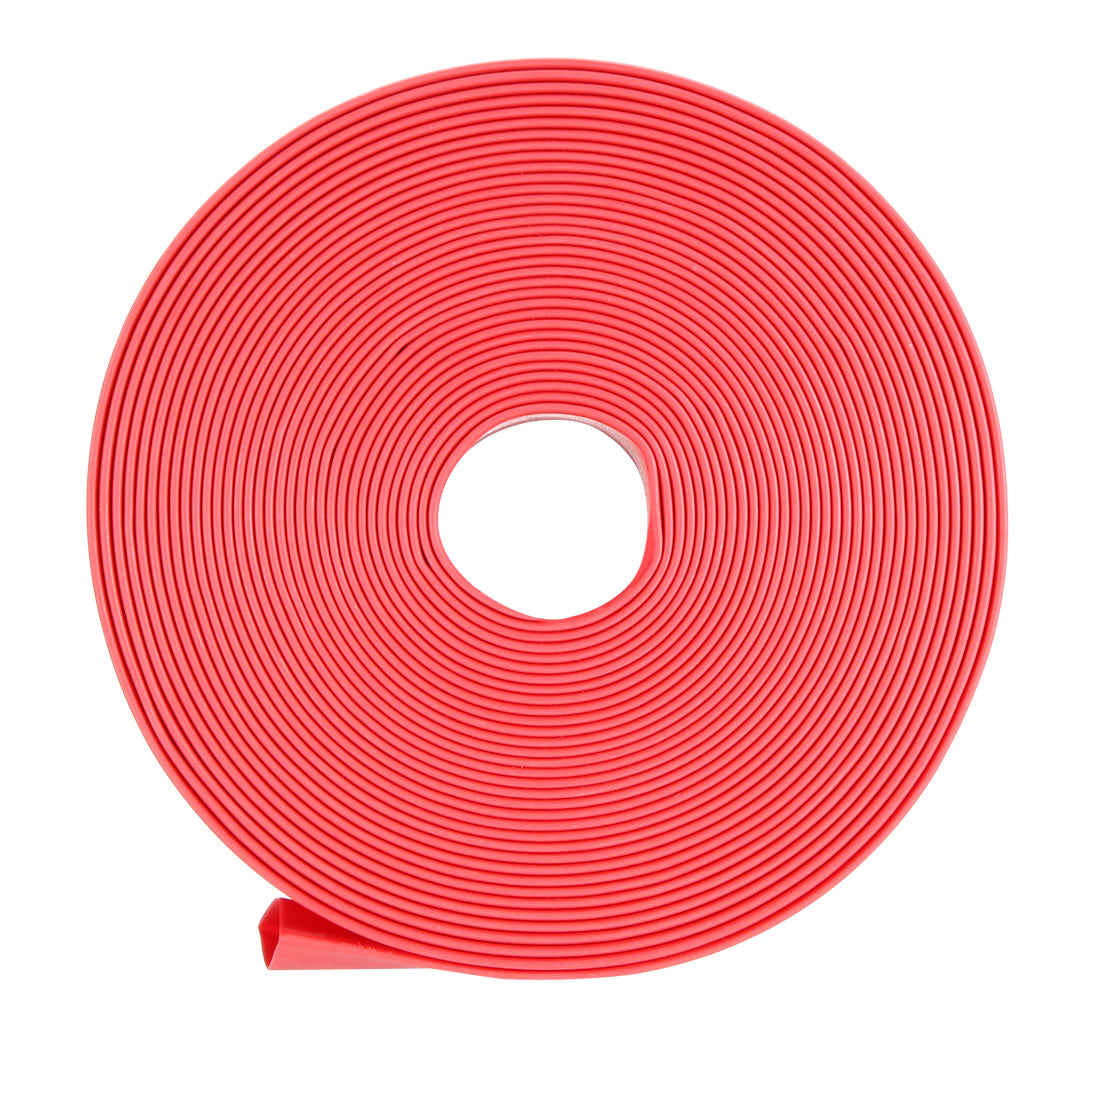 uxcell Uxcell Heat Shrink Tube 2:1 Electrical Insulation Tube Wire Cable Tubing Sleeving Wrap Red 15mm Diameter 5m Long